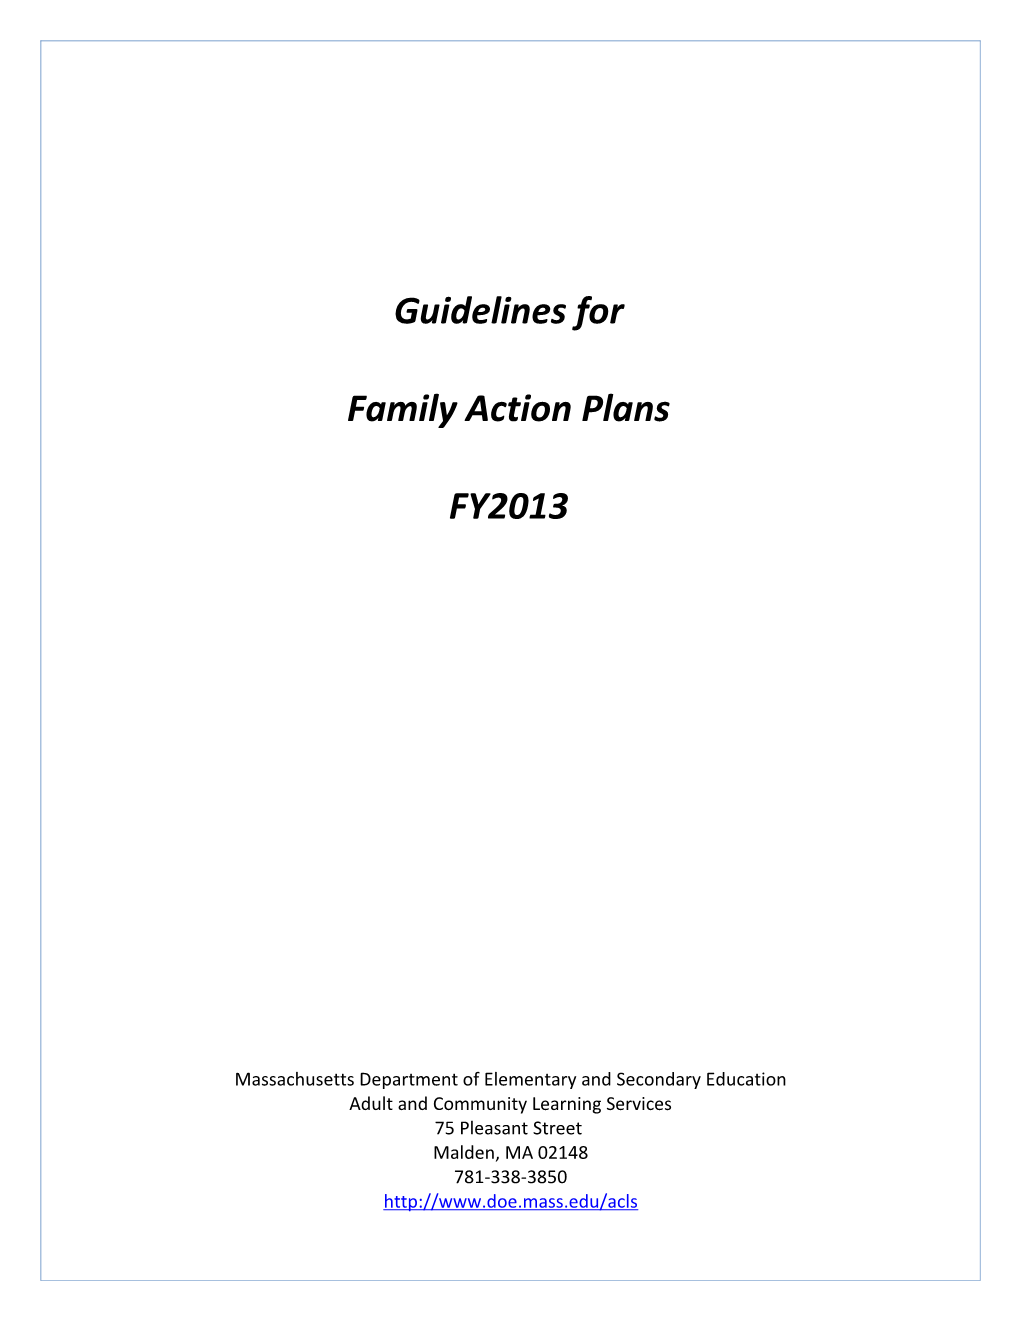 Guidelines for Family Action Plans